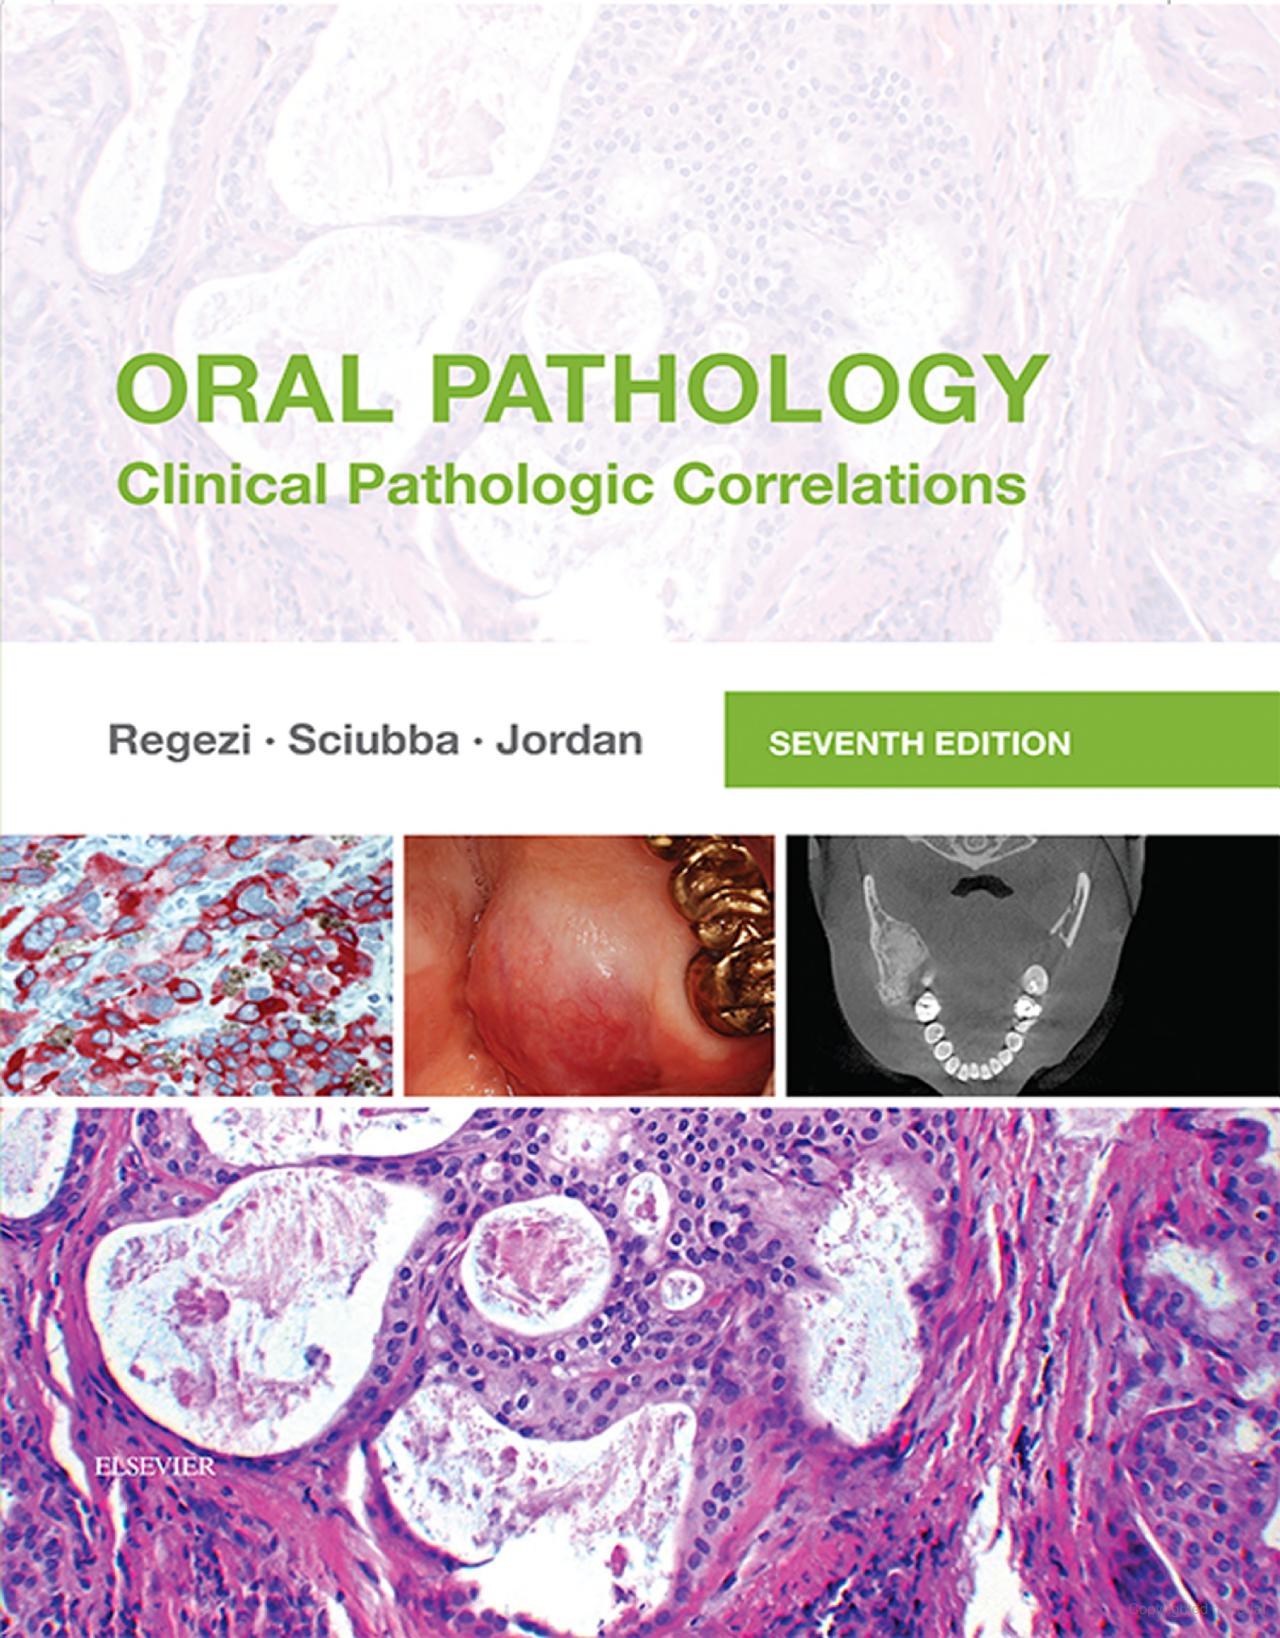 Oral Pathology Clinical Pathologic Correlations 7th Edition PDF Free Download (Direct Link)